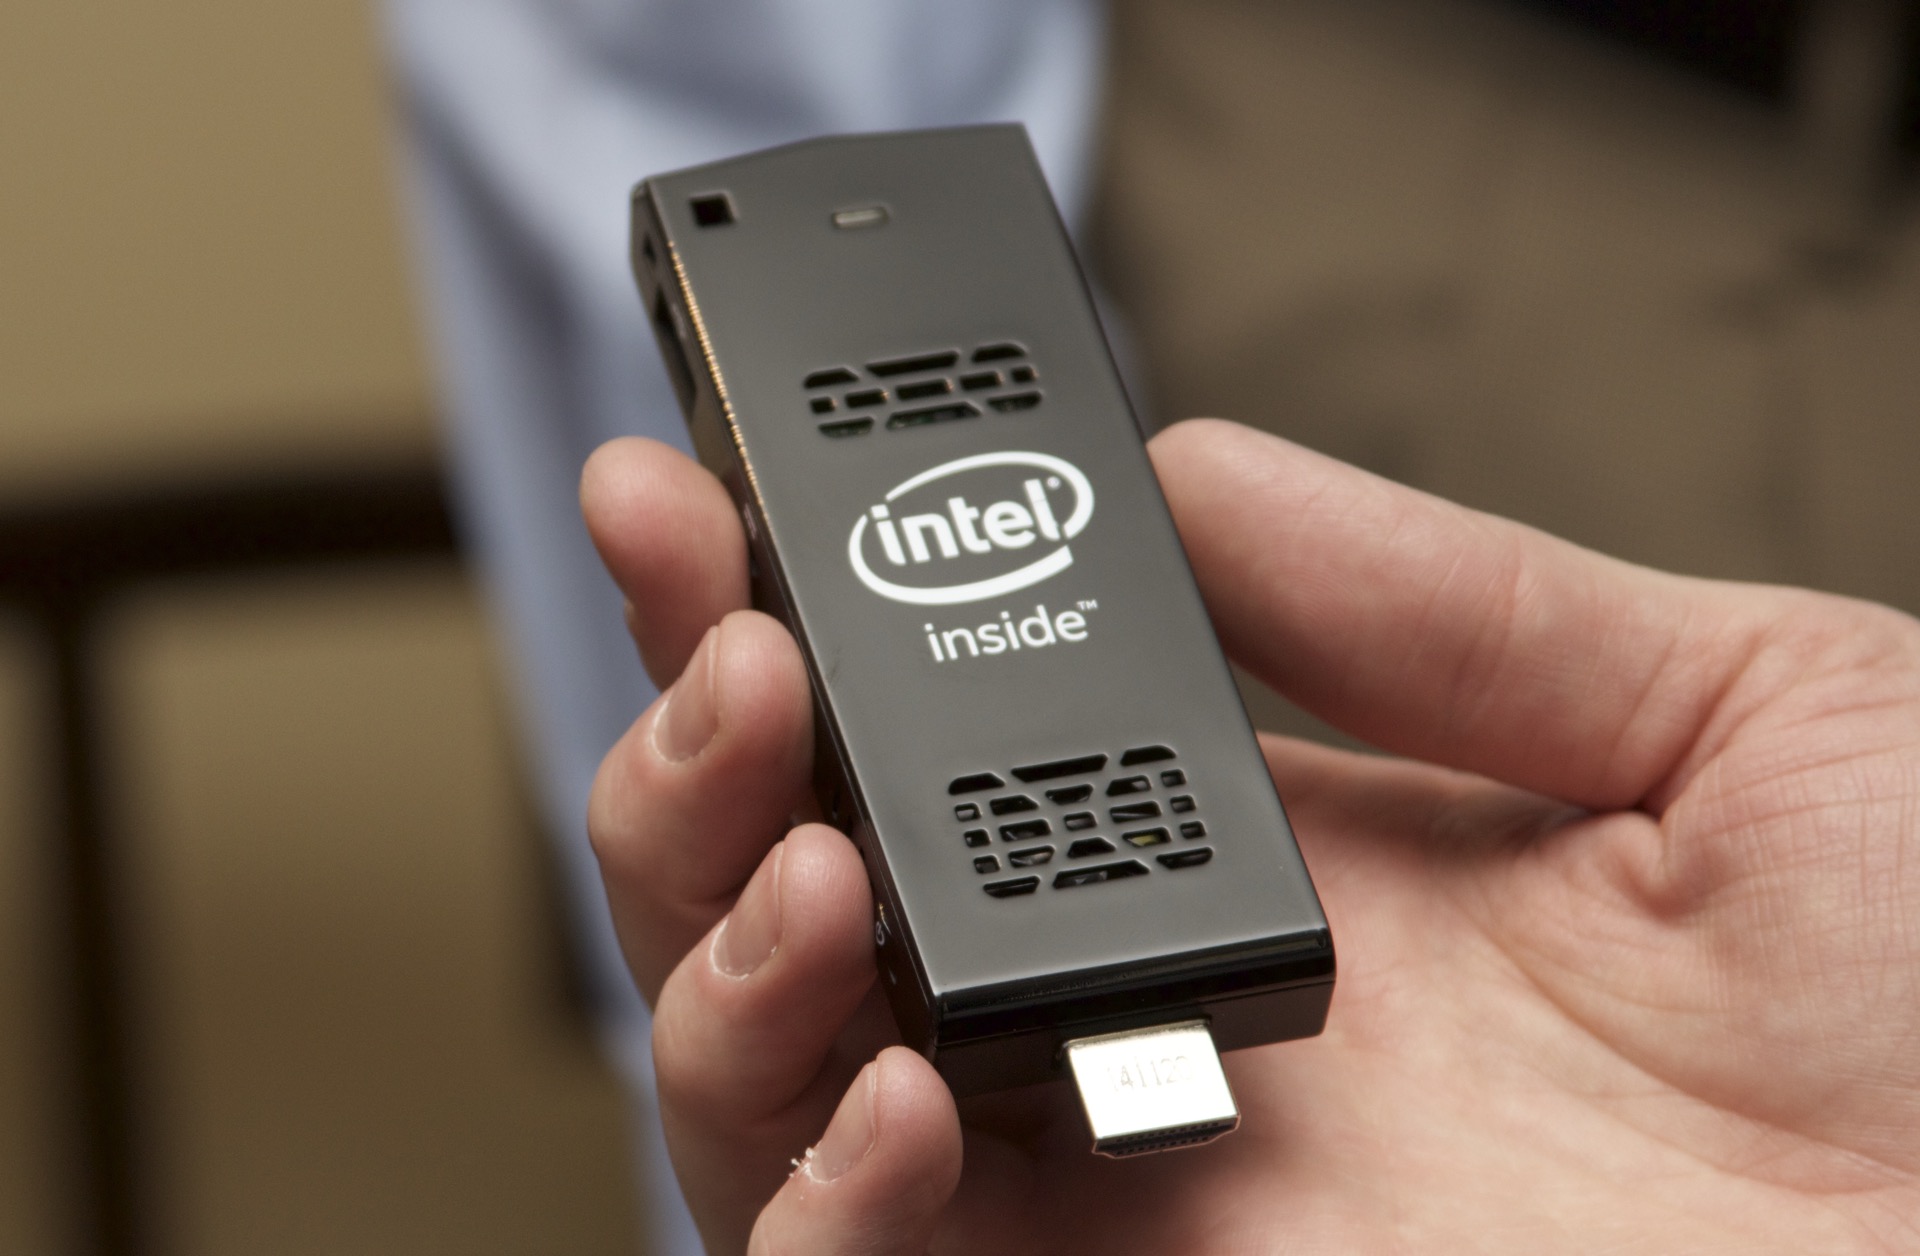 Overleve beskæftigelse Grine Intel's Compute Stick: A full PC that's tiny in size (and performance) |  Ars Technica